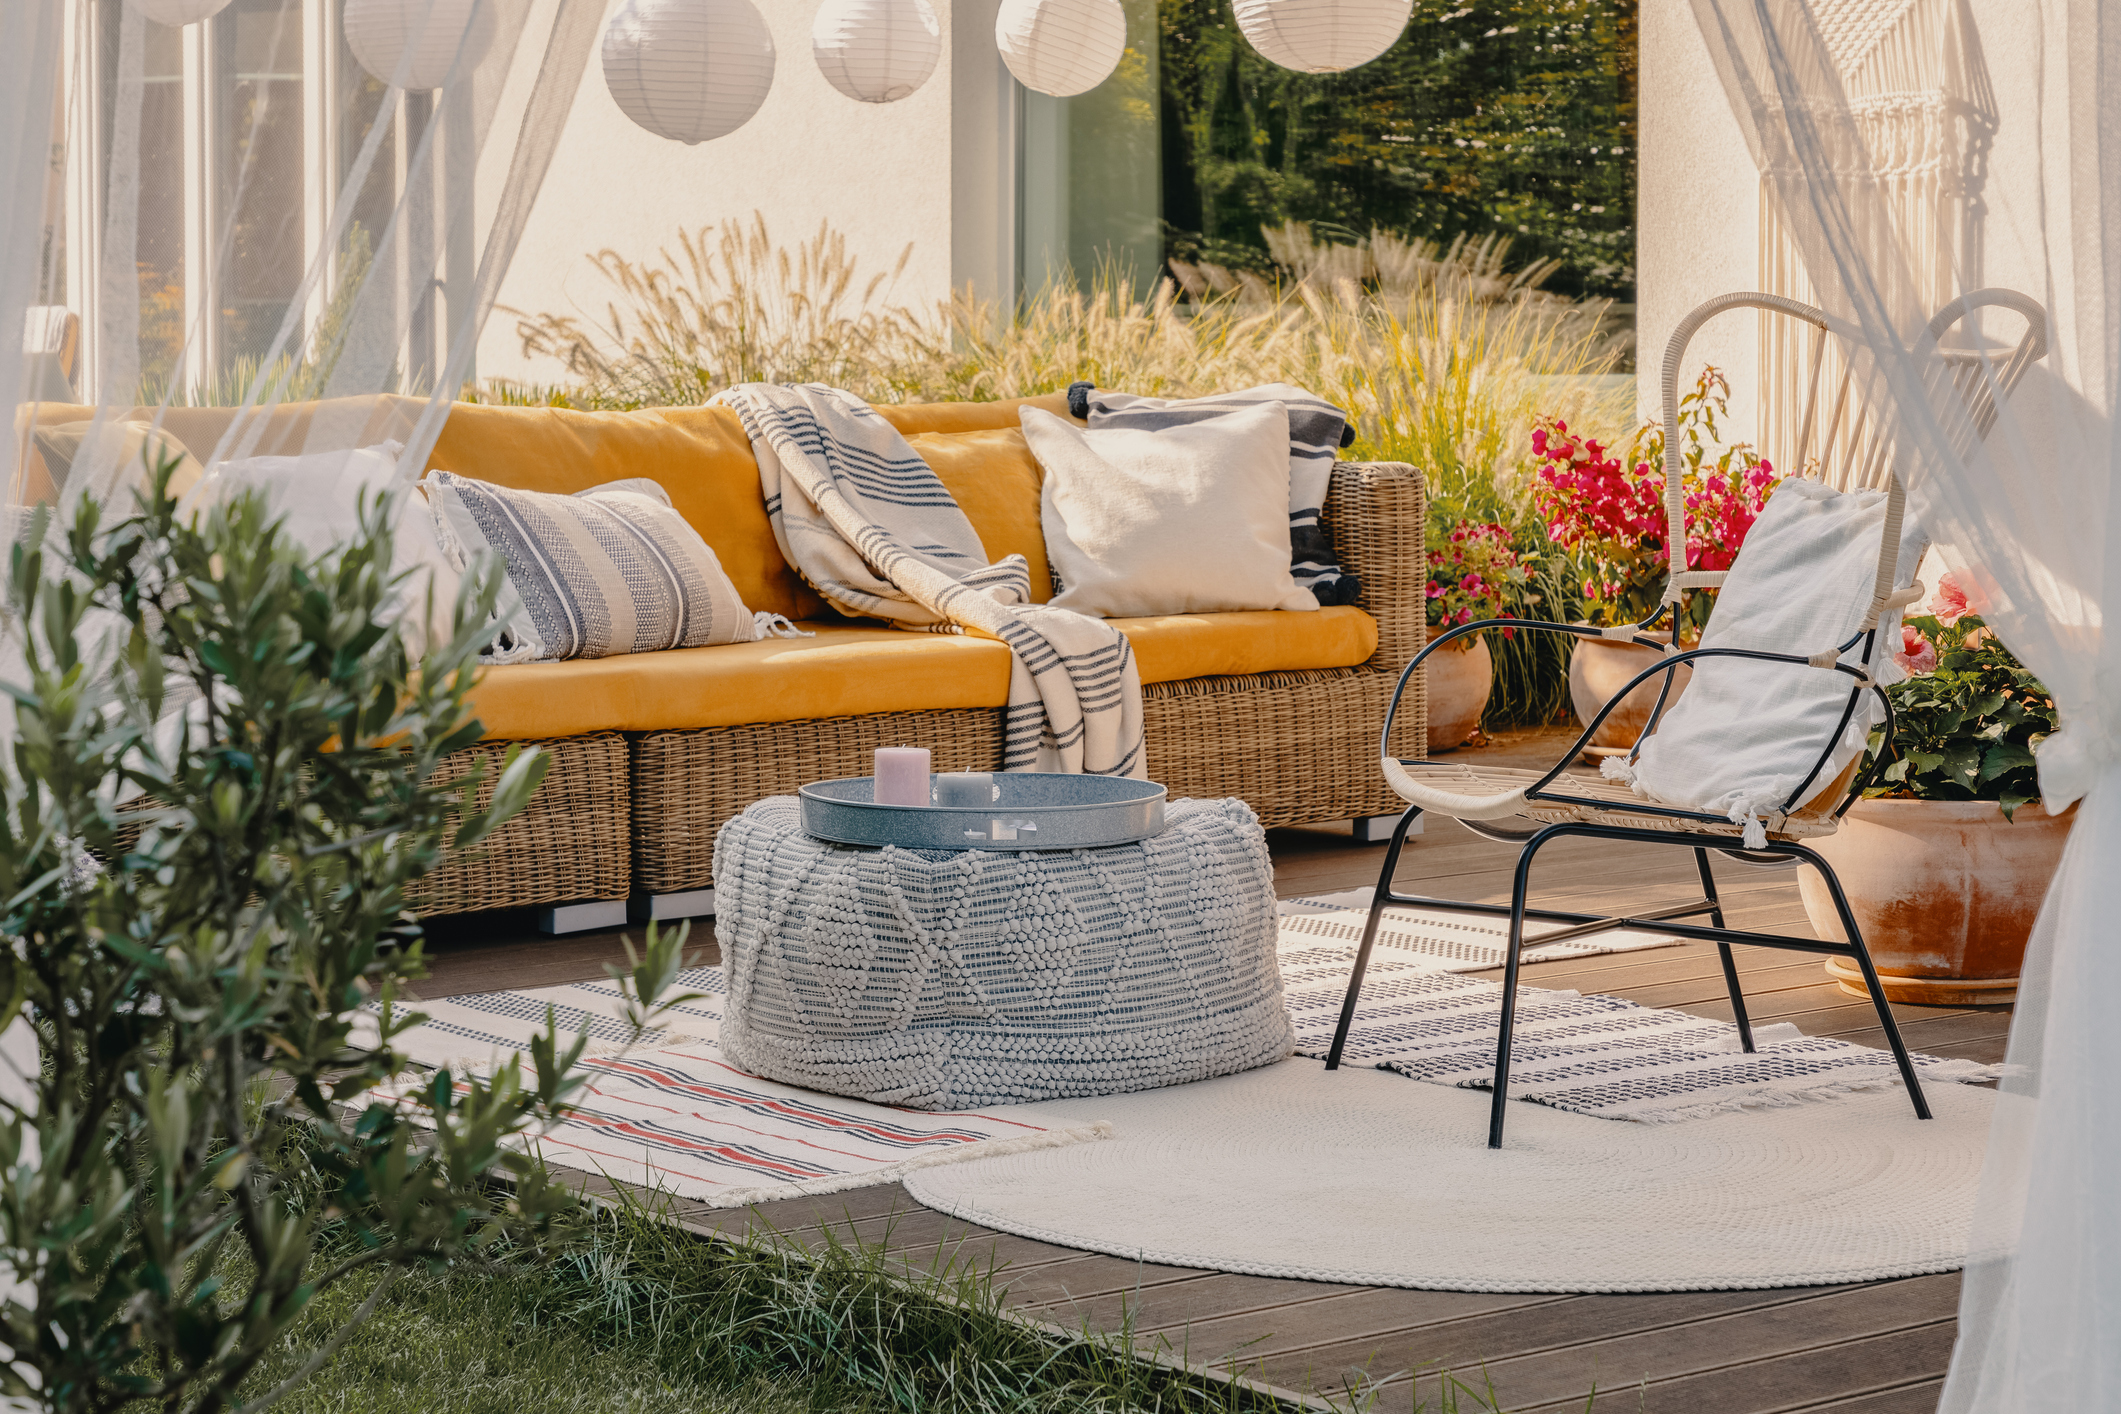 How To Patio Cushions Safely